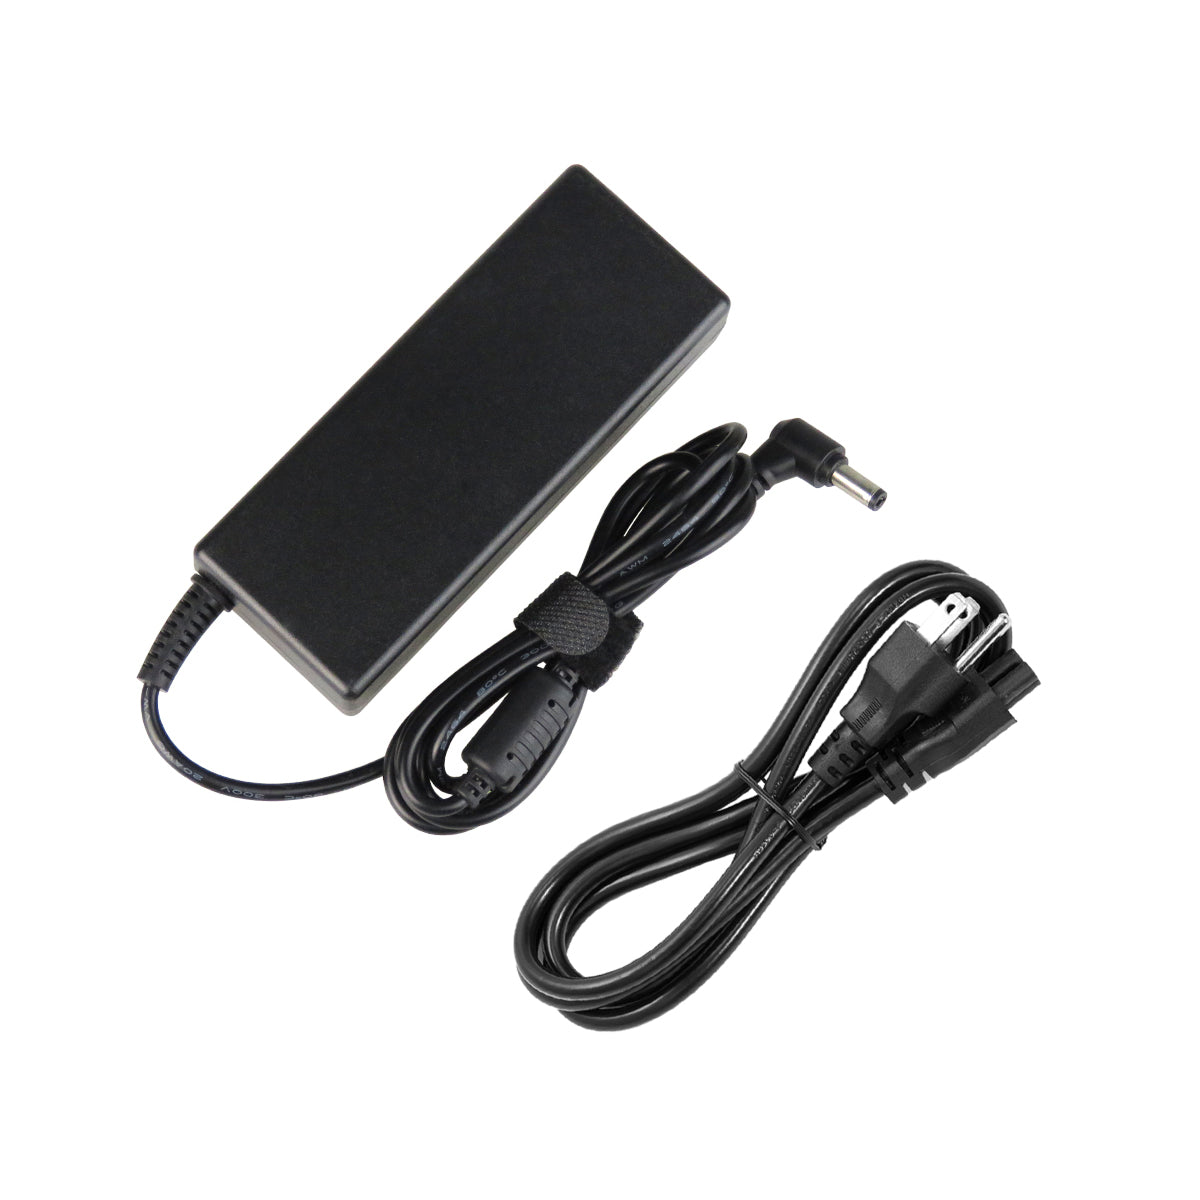 AC Adapter Charger for ASUS A84 Notebook.